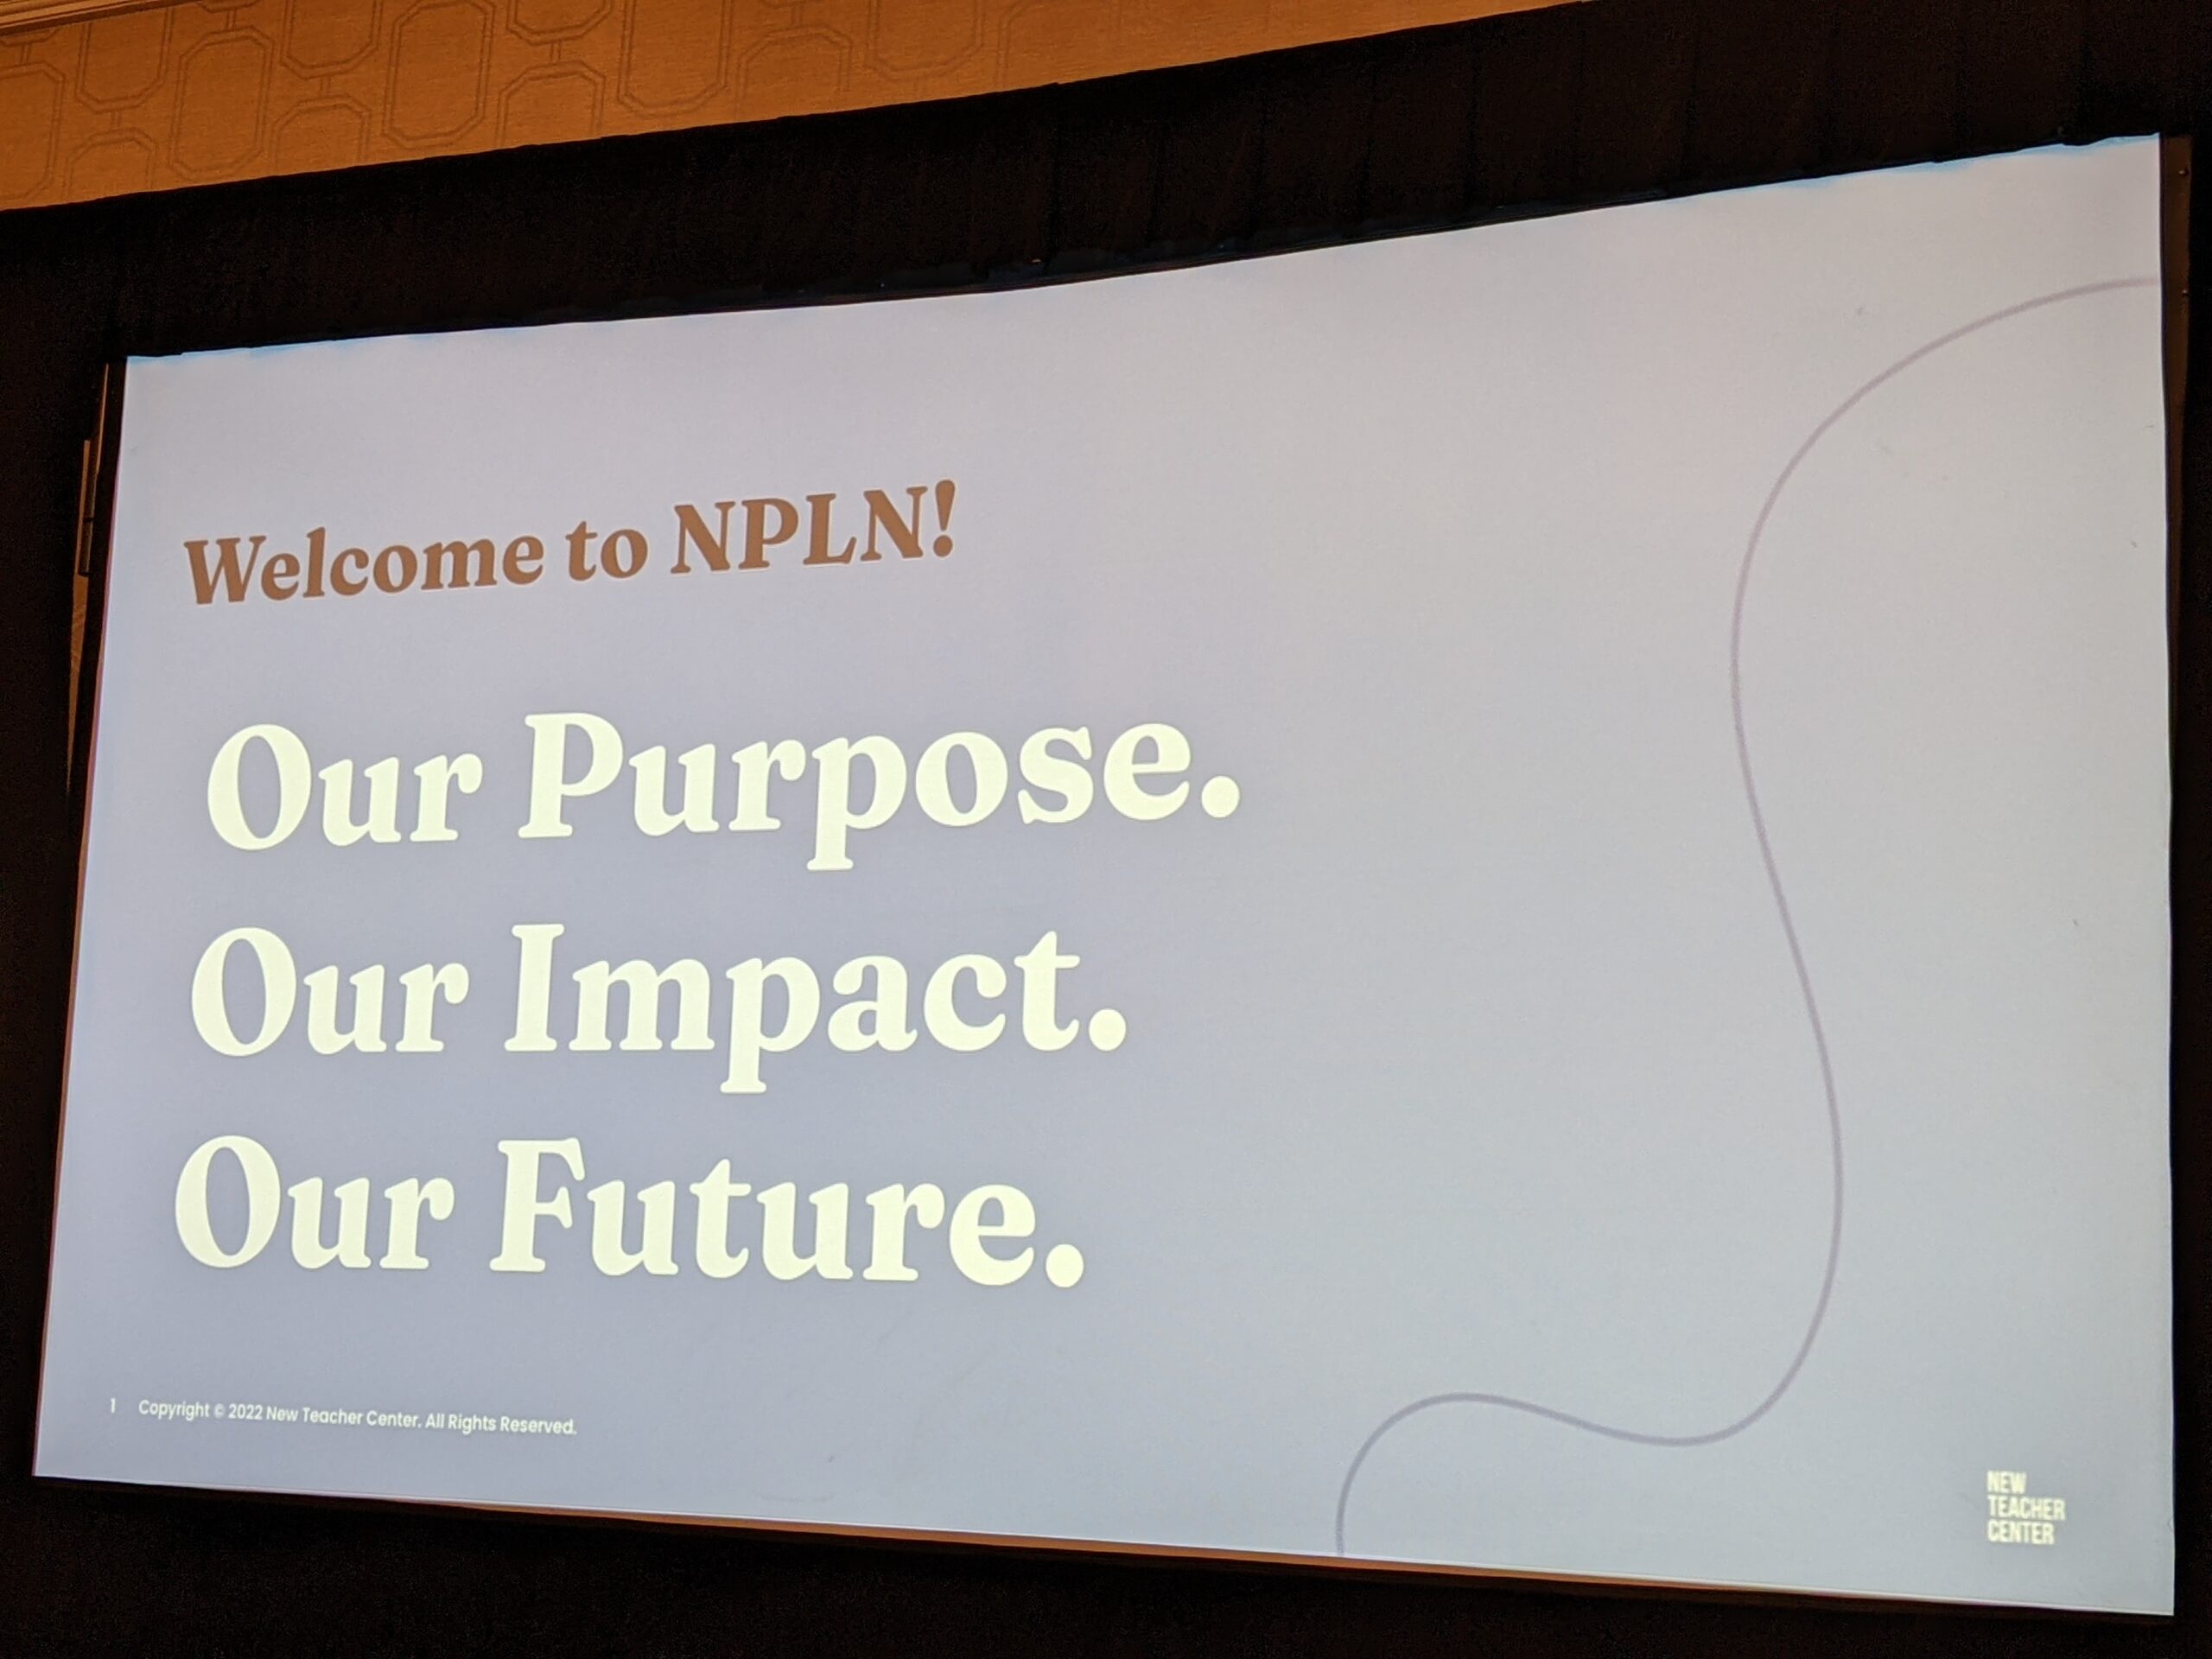 NPLN in NOLA — Our Purpose. Our Impact. Our Future.